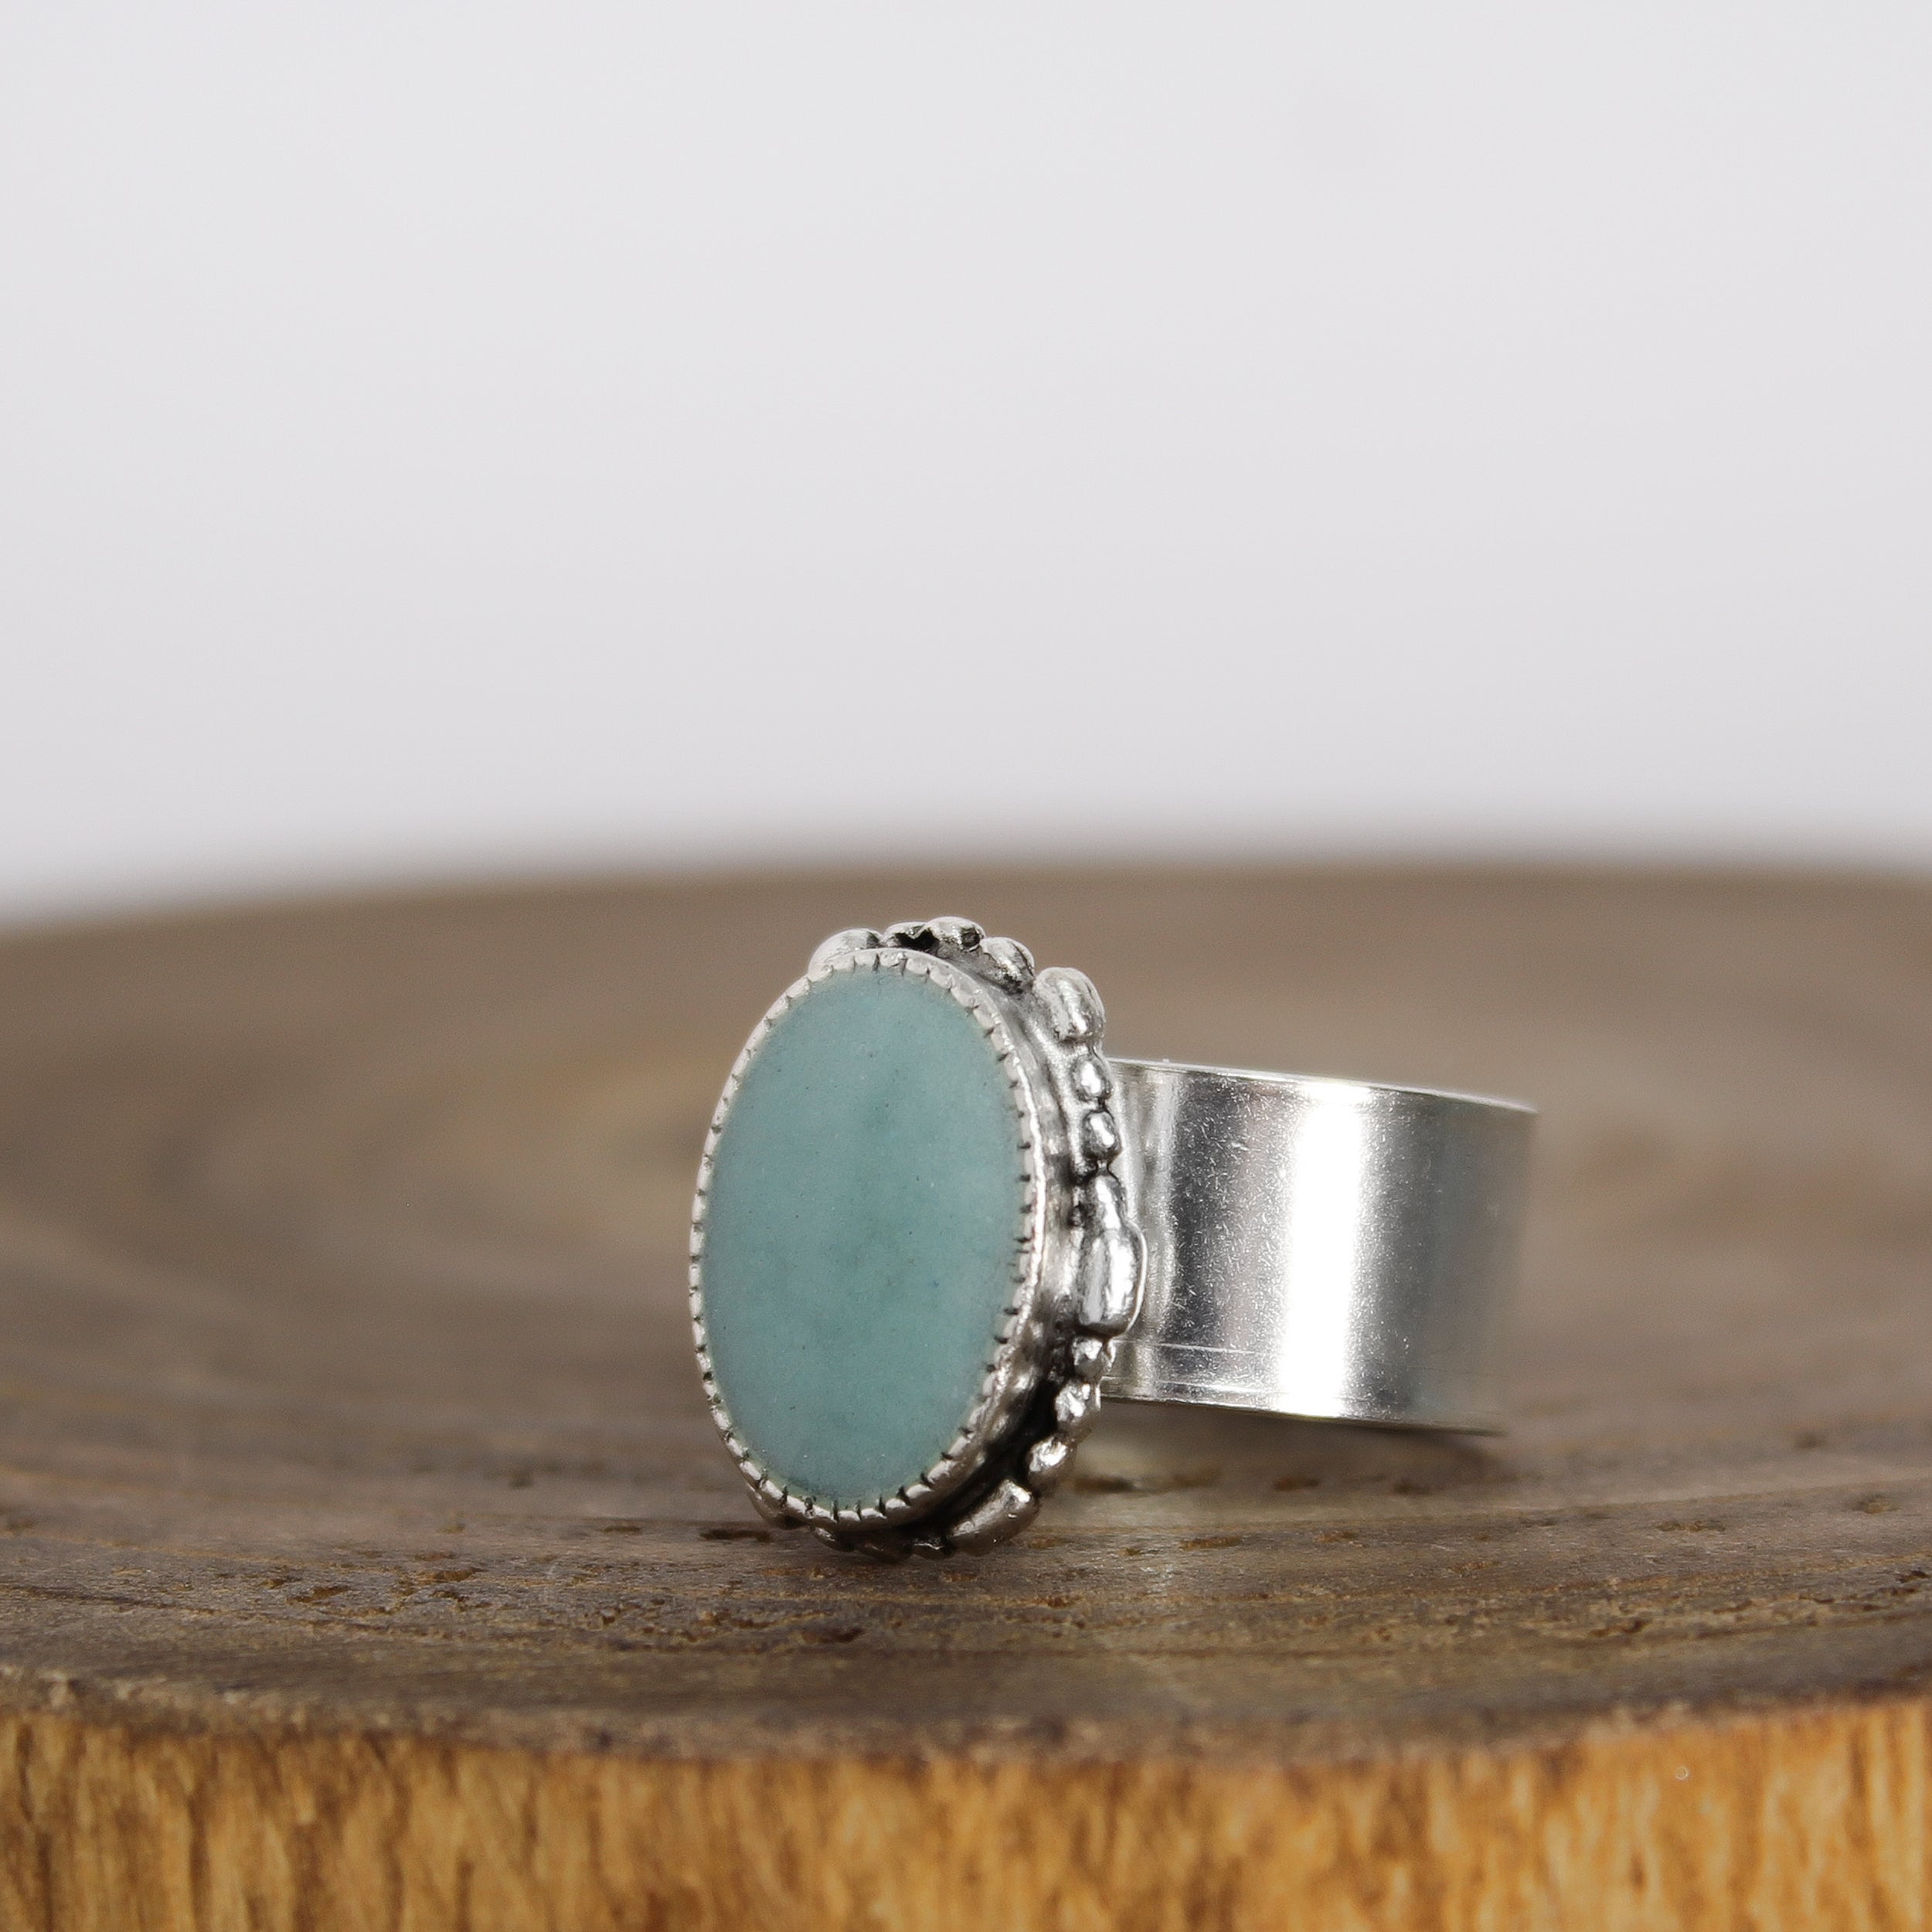 Ornate Turquoise Ring Metaphysical Jewelry & Gifts